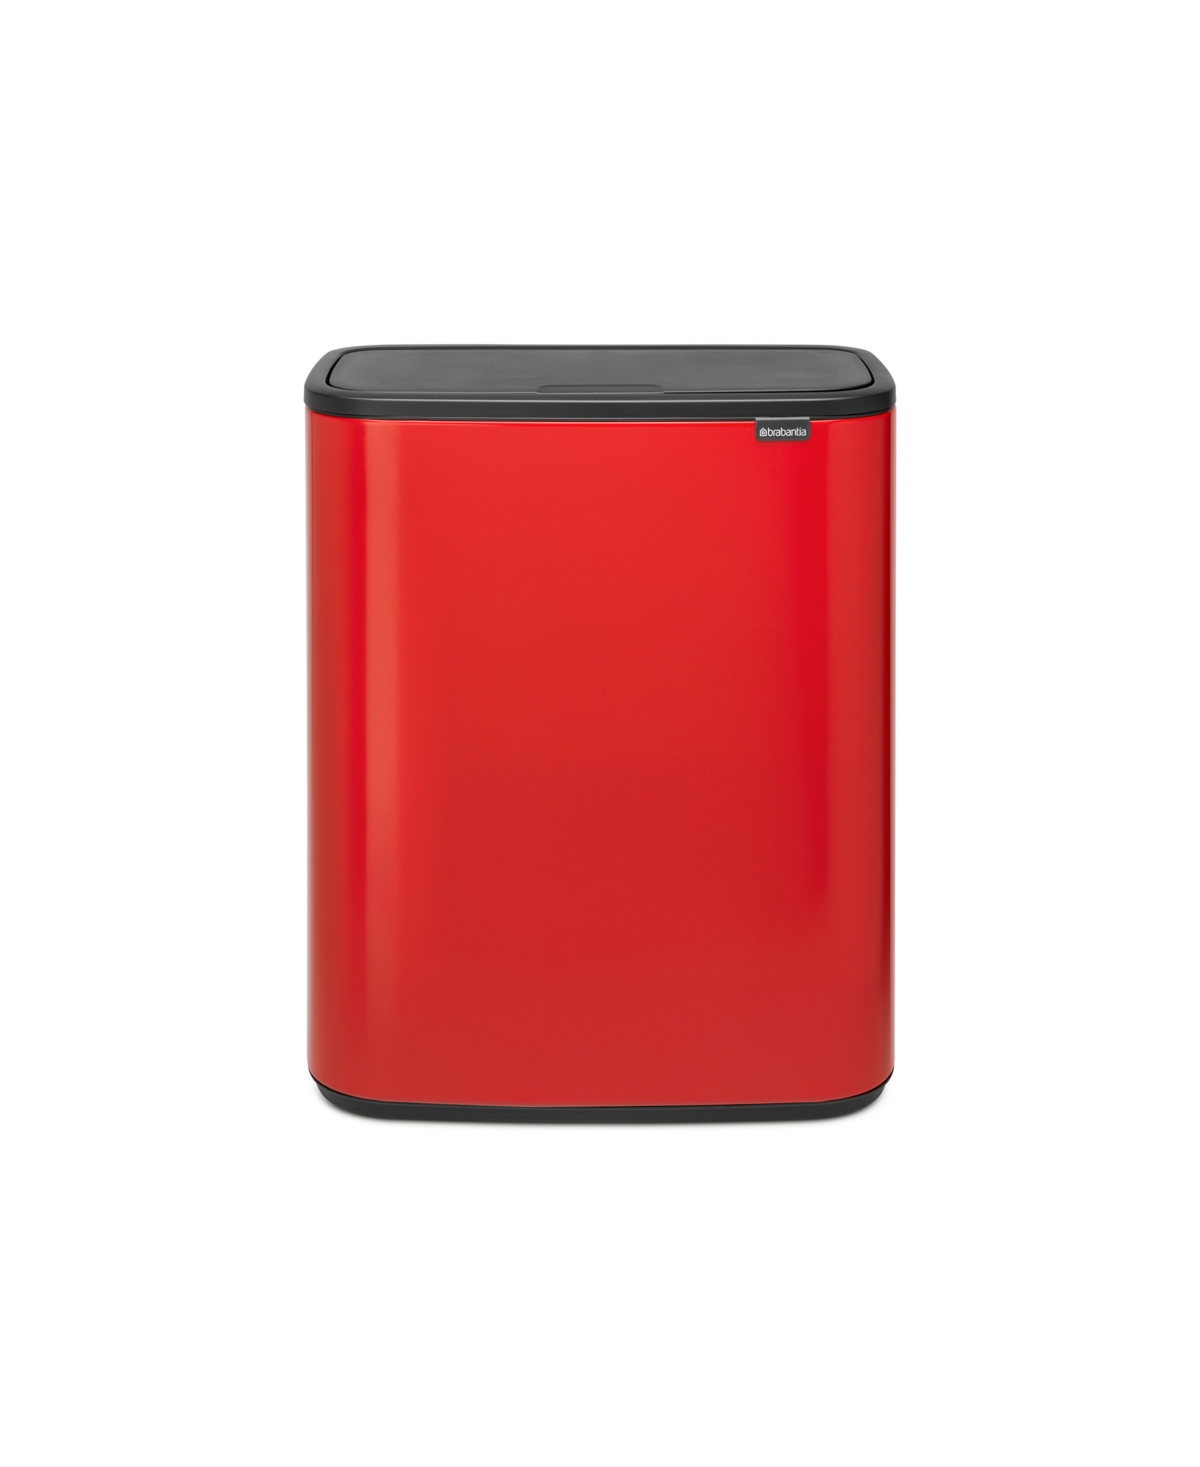 Bo Touch Top Trash Can, 16 Gallon, 60 Liter - Passion Red